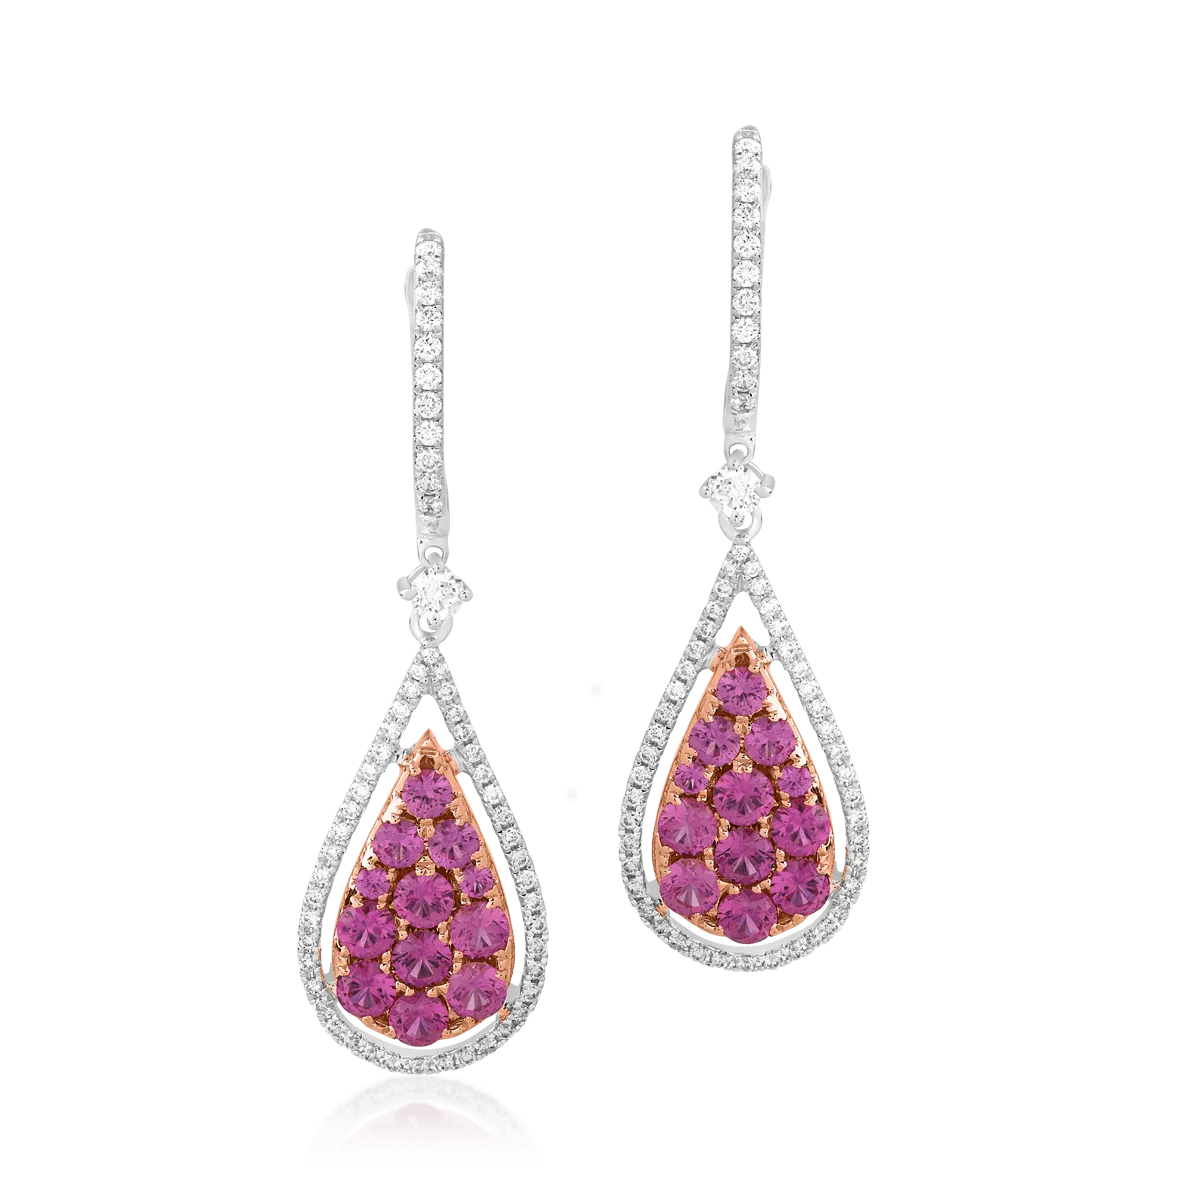 18K white-rose gold earrings with 1.53ct pink sapphires and 0.49ct diamonds